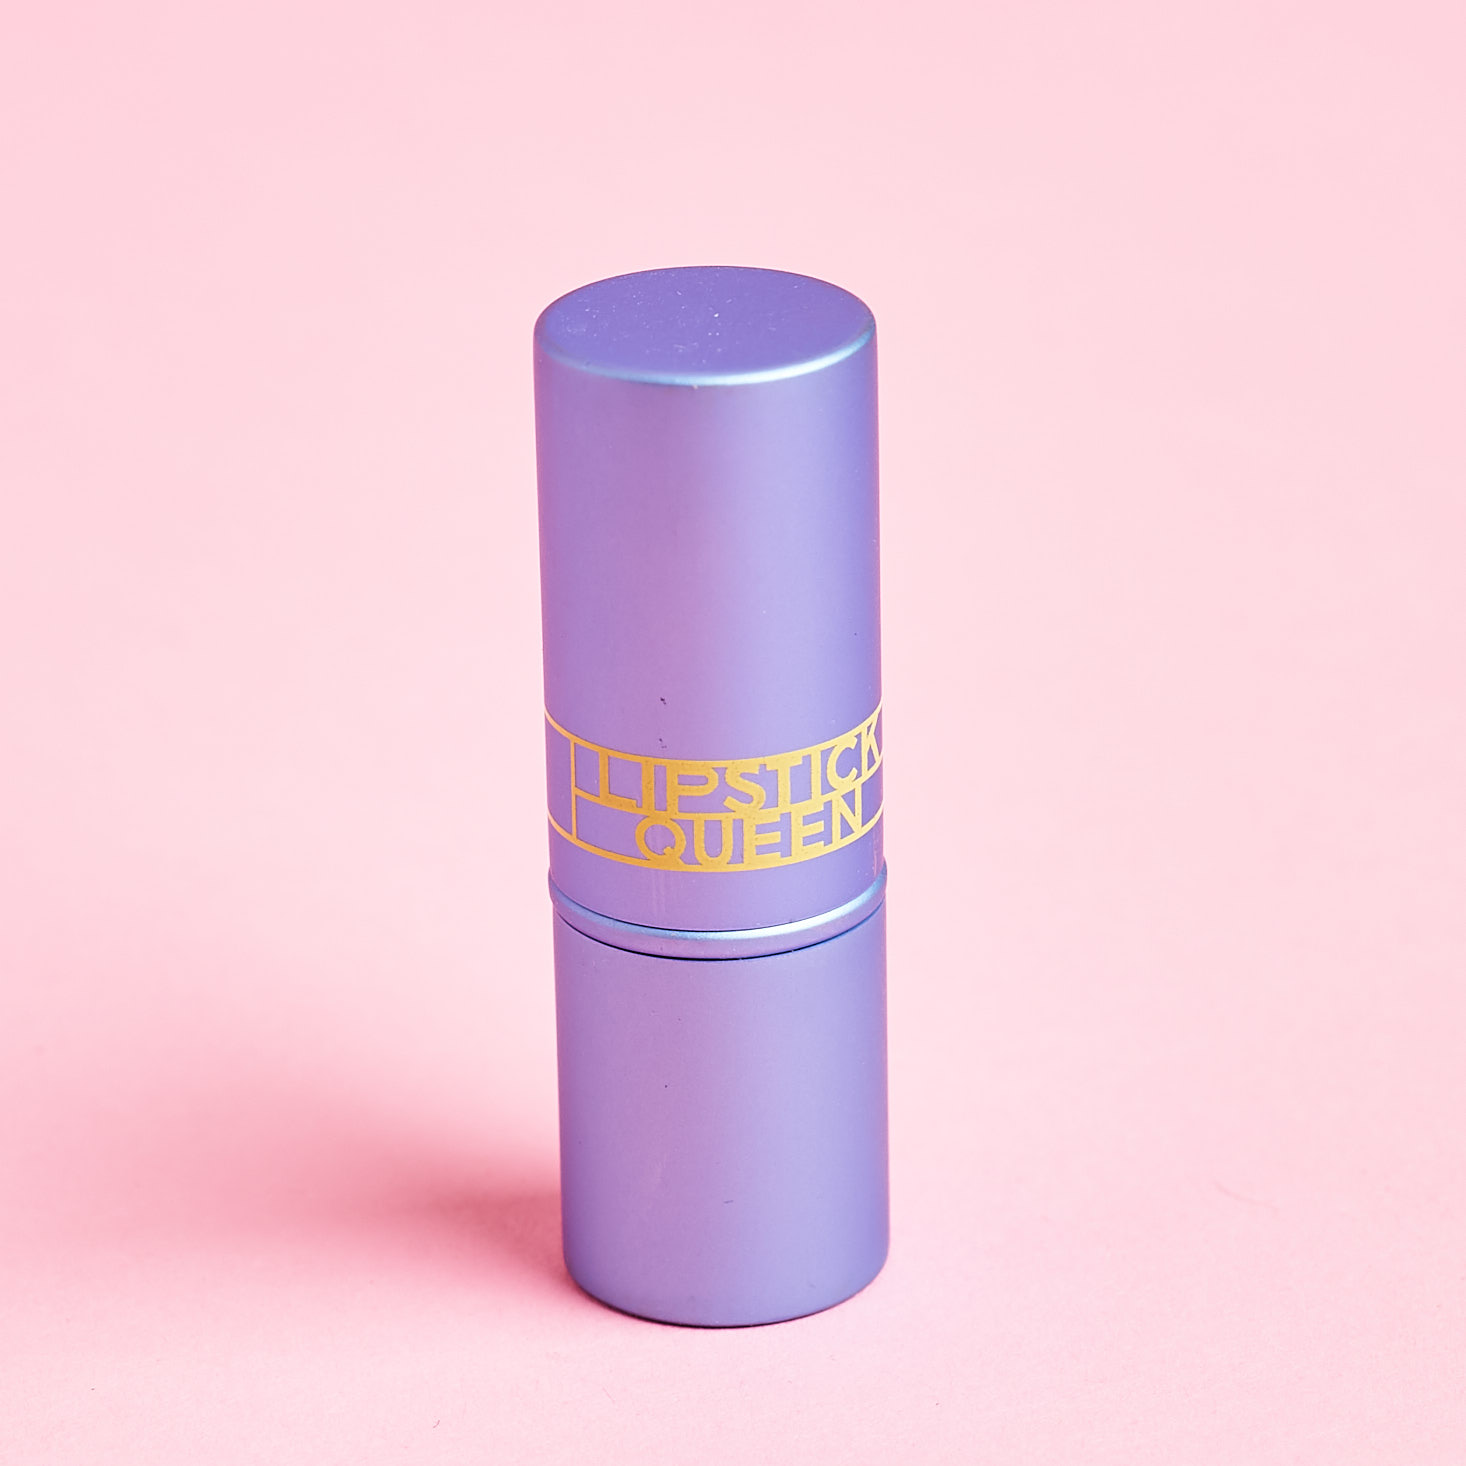 Birchbox Curated #1 May 2019 beauty box review lipstick